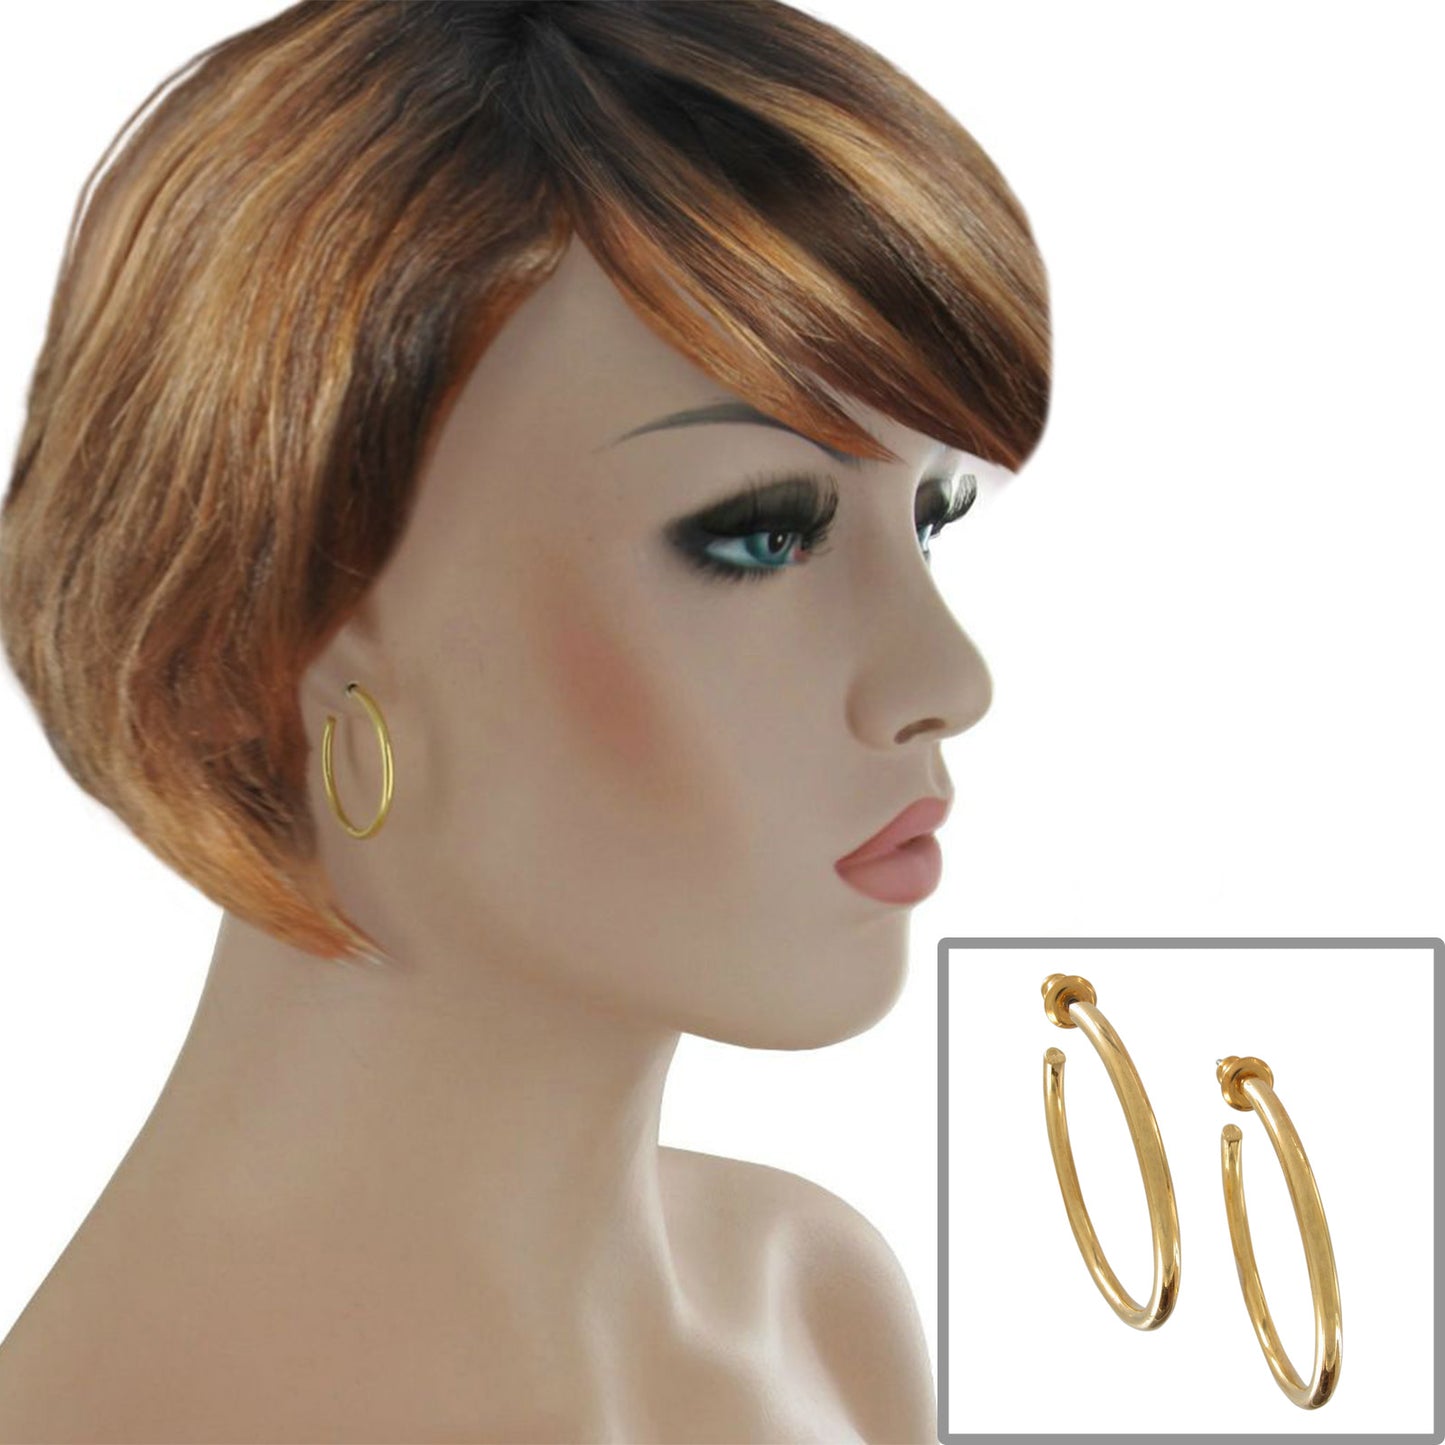 Gold Tone Solid Hoop Post and Clutch Earrings 1 1/8" Wire Size 2mm